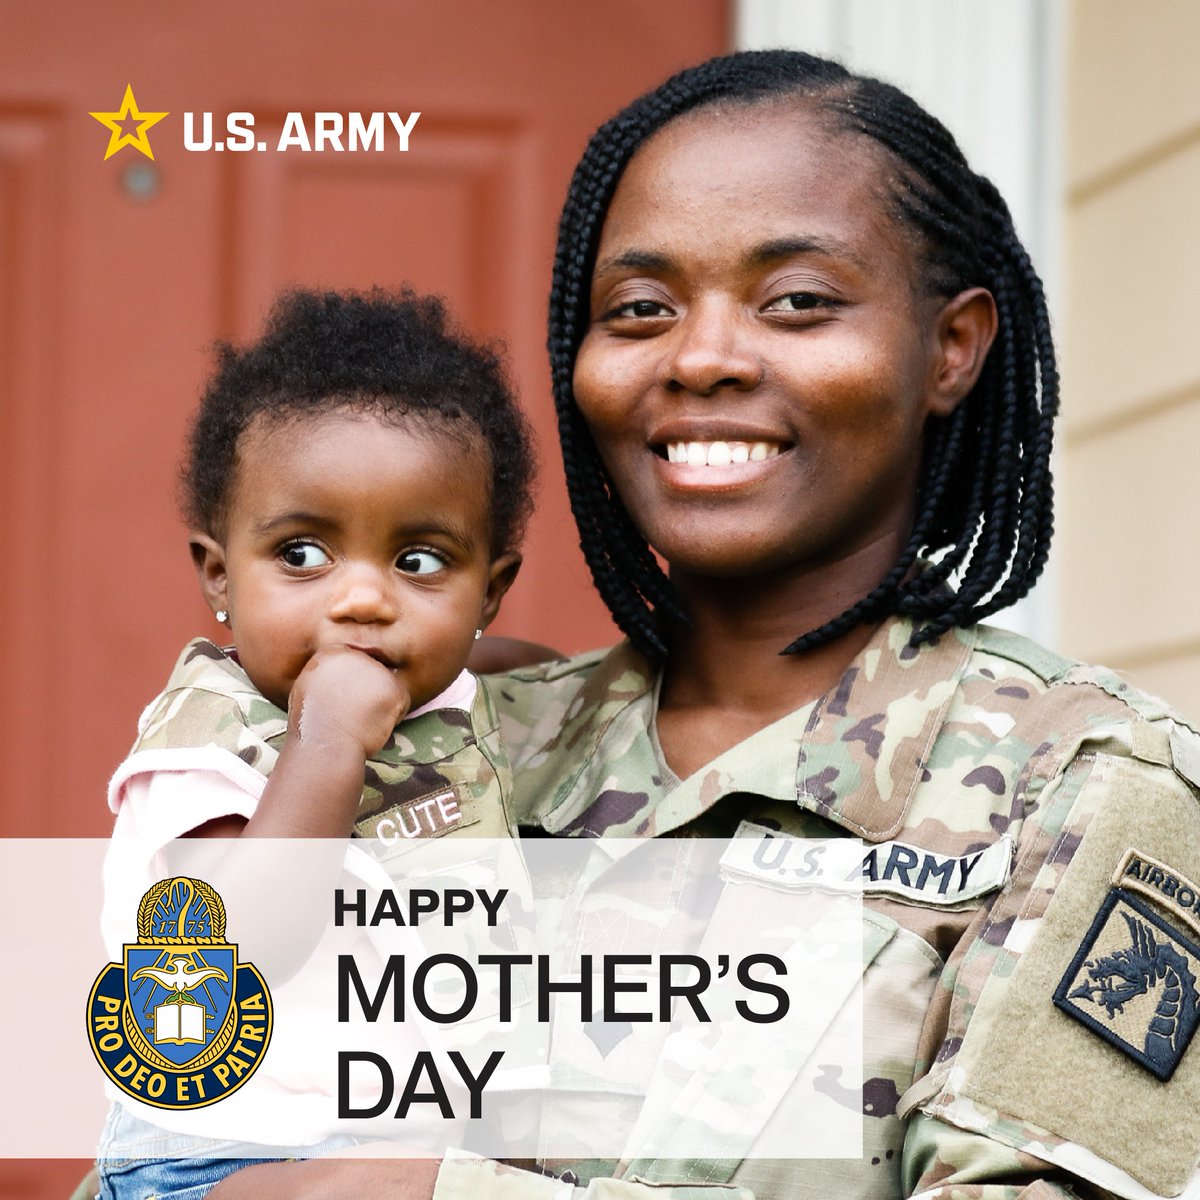 Happy Mother’s Day! The Army Chaplain Corps would like to thank all mothers for the important role they play in our lives. Without your strength, courage, understanding, and encouragement, we would not be the people we are today. #MothersDay